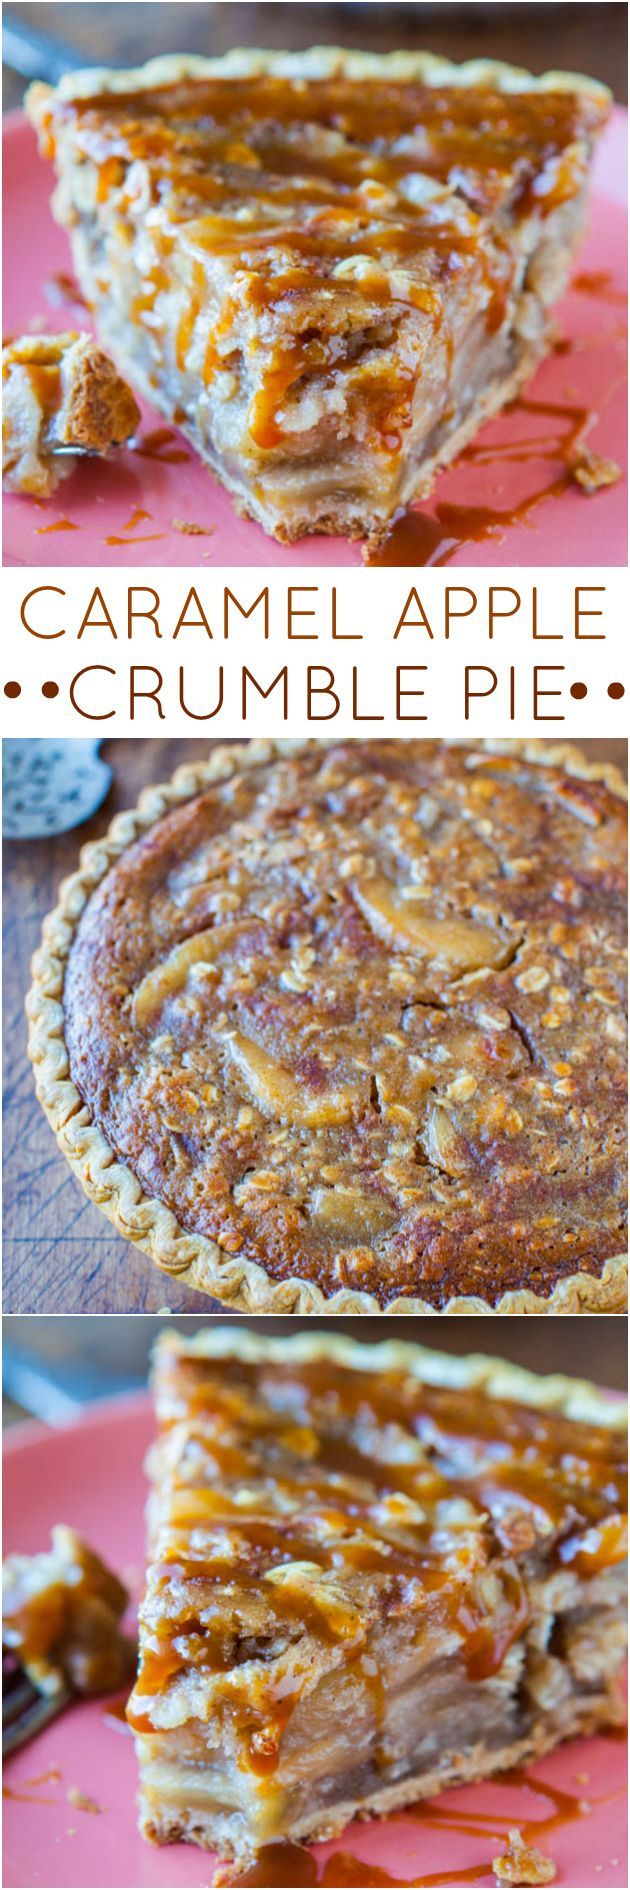 Caramel Apple Crumble Pie – Apple pie meets apple crumble with loads of caramel! The easiest apple pie youll ever make. Goofproof